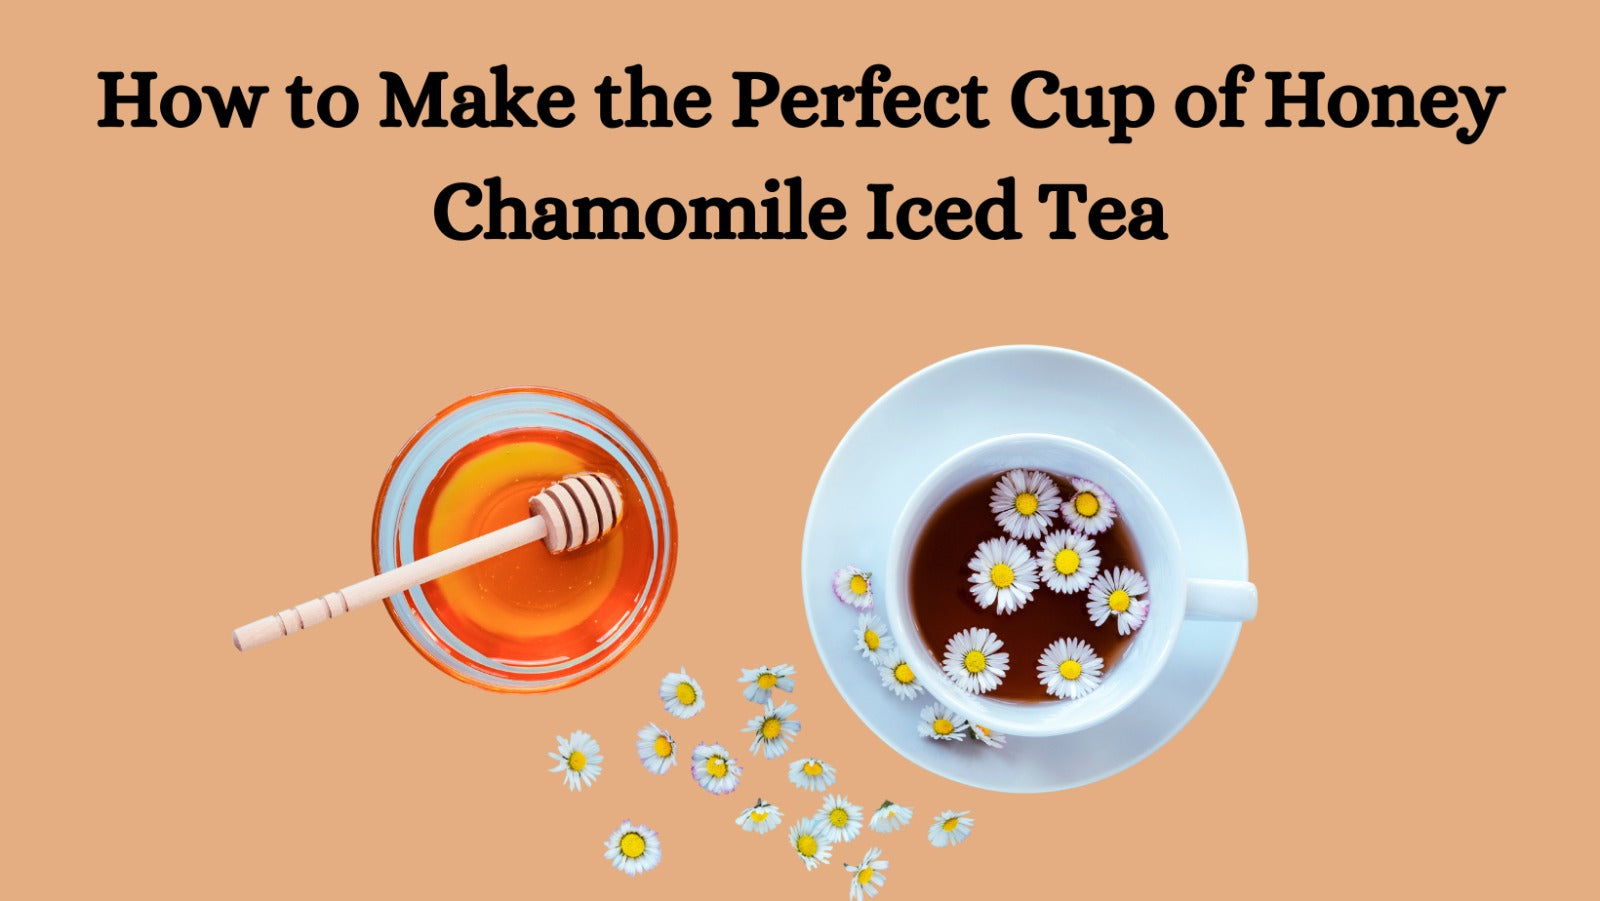 How to Make the Perfect Cup of Honey Chamomile Iced Tea